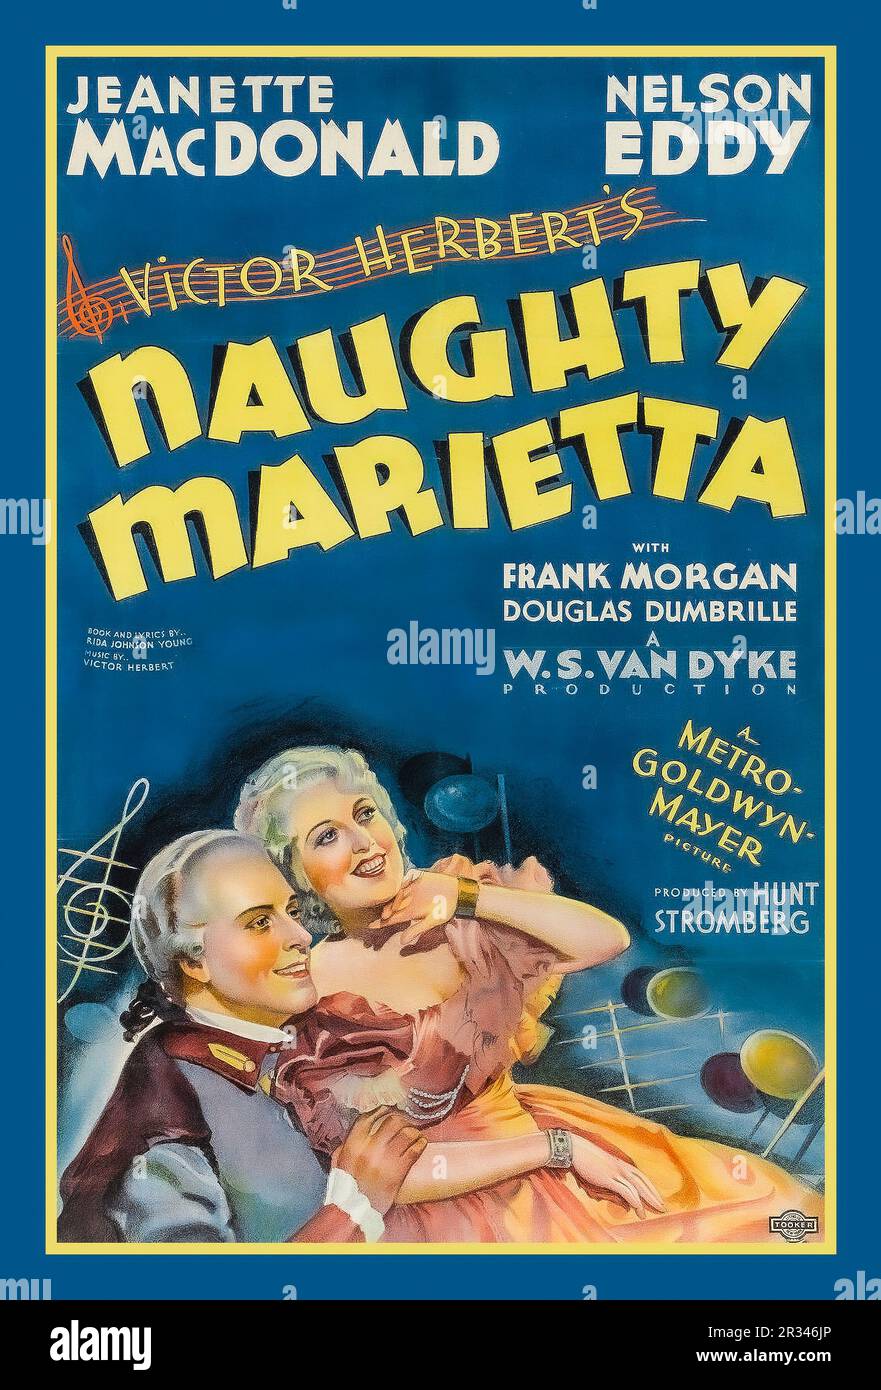 Vintage 1930s Movie Film Poster NAUGHTY MARIETTA starring Jeanette MacDonald and Nelson Eddy with Frank Morgan  Douglas Dumbrille, WS Van Dyke, Produced By Hunt Stromberg. Victor Herbert direction  Metro-Goldwyn-Mayer Studios MGM Hollywood USA Stock Photo